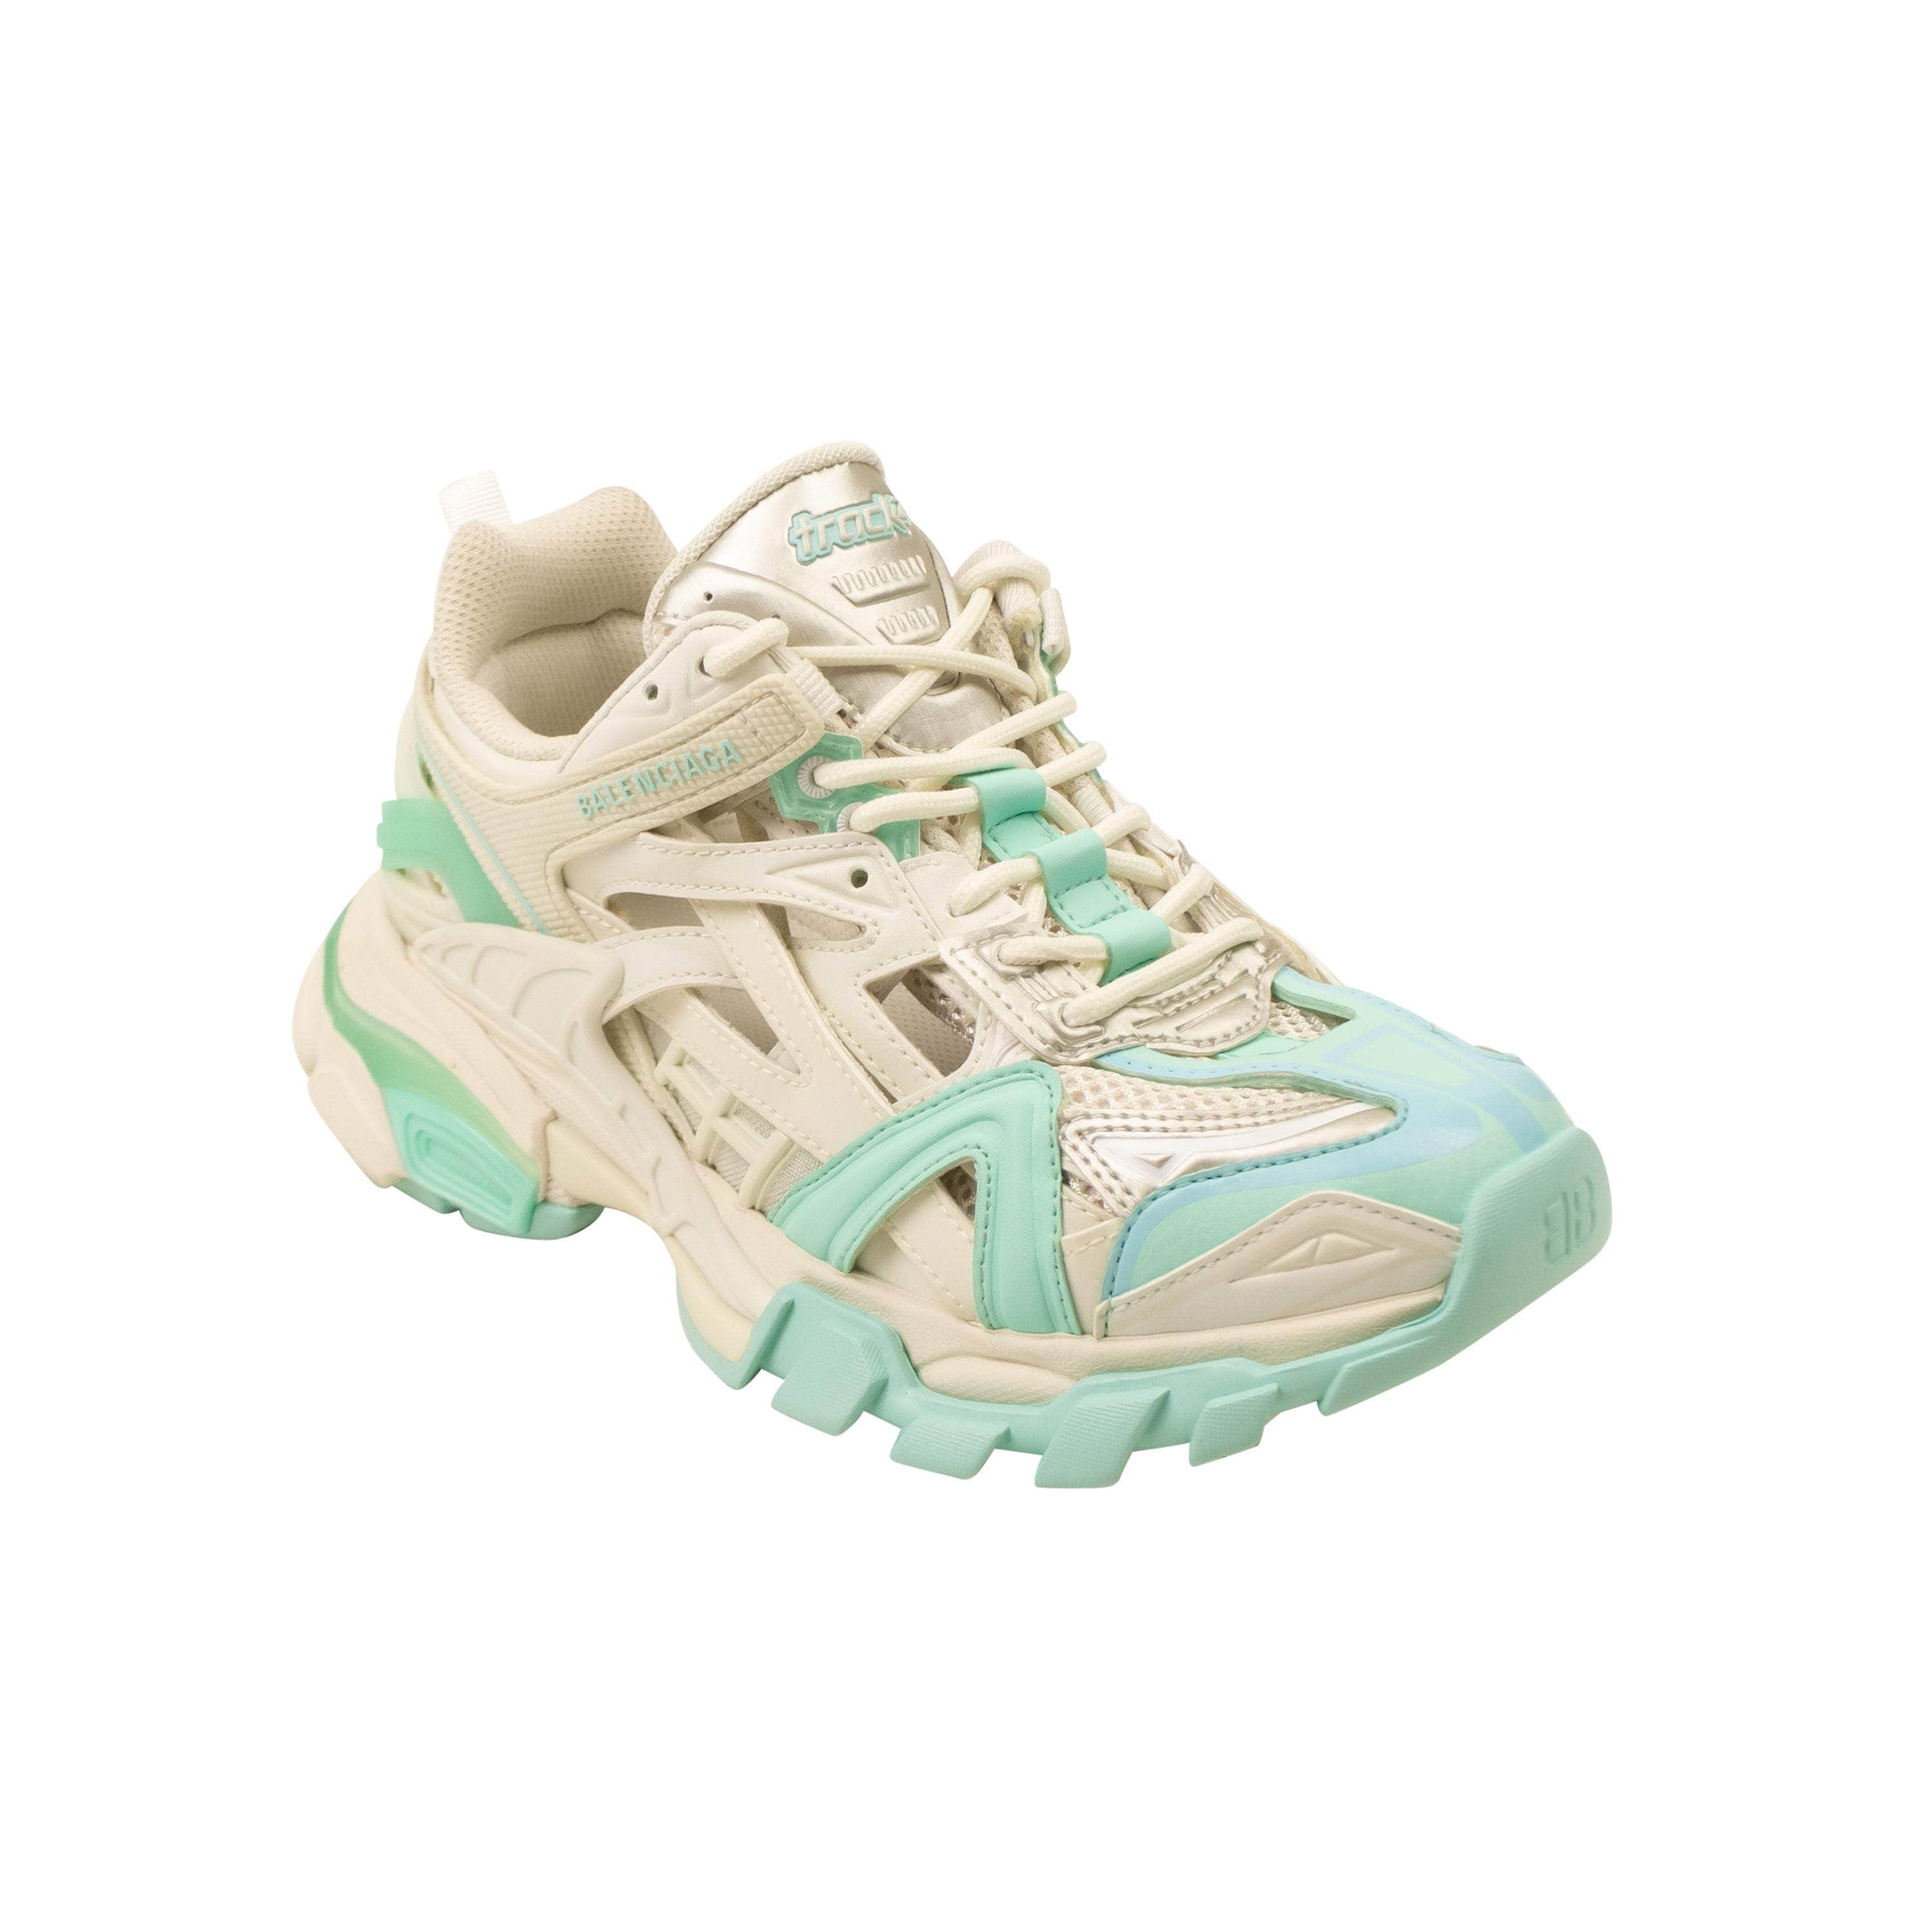 Balenciaga 1000-2000, balenciaga, channelenable-all, chicmi, couponcollection, gender-womens, main-shoes, size-36, size-38, size-39 White And Green Track 2 Sneakers